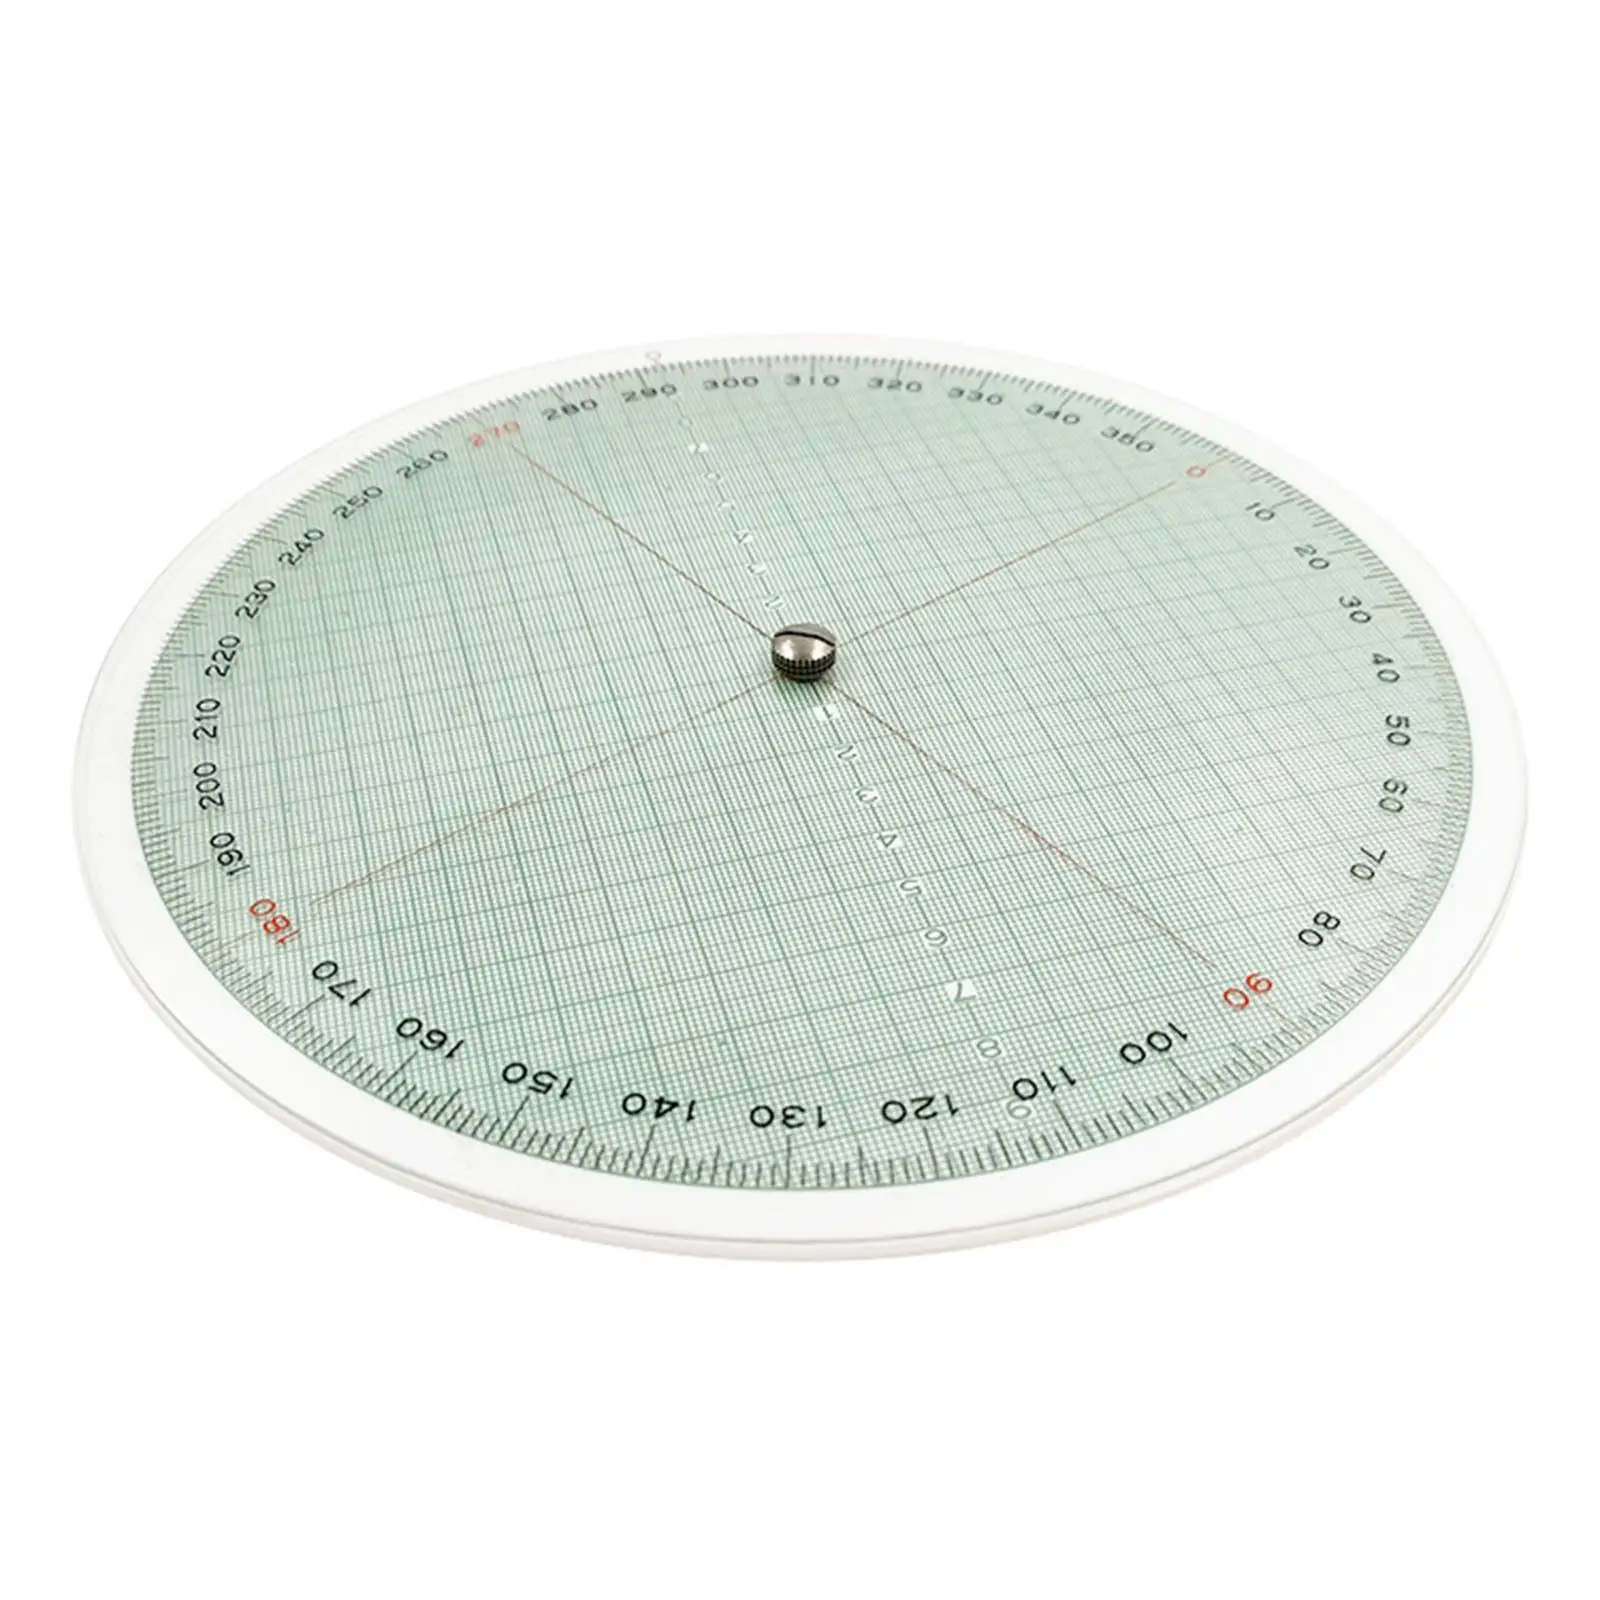 Nautical Slide Rule Devices Professional Portable Simple Using Stable Durable Lightweight Navigation Tool Wind Calculator